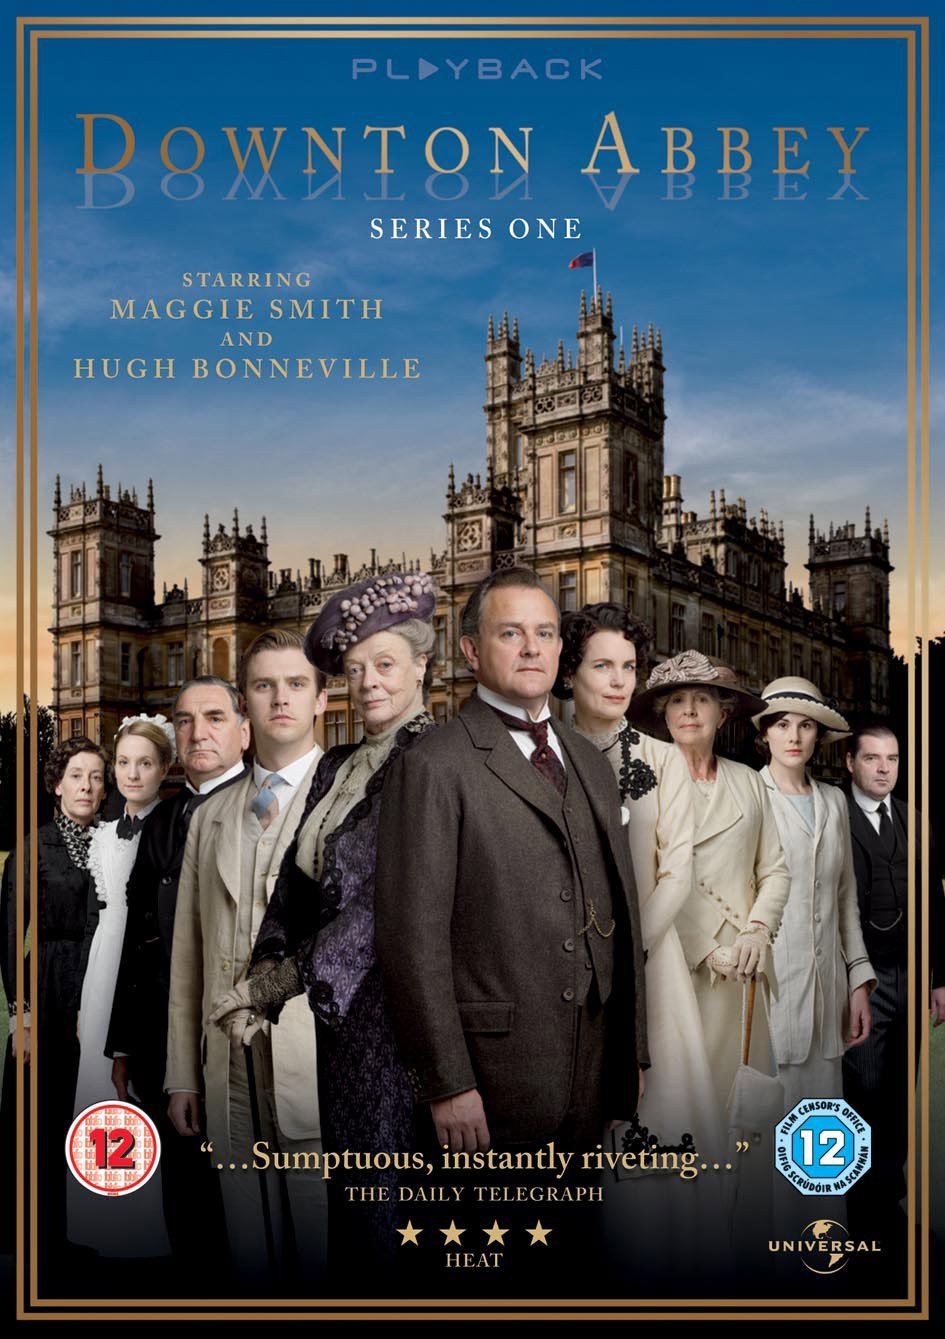 downton abbey dvd - Plyback Bswnton Abbey Series One Starring Maggie Smith And Hugh Bonneville O016 Msor'S Office ...Sumptuous, instantly riveting.. Nnan Pudoir The Daily Telegraph Universal Heat